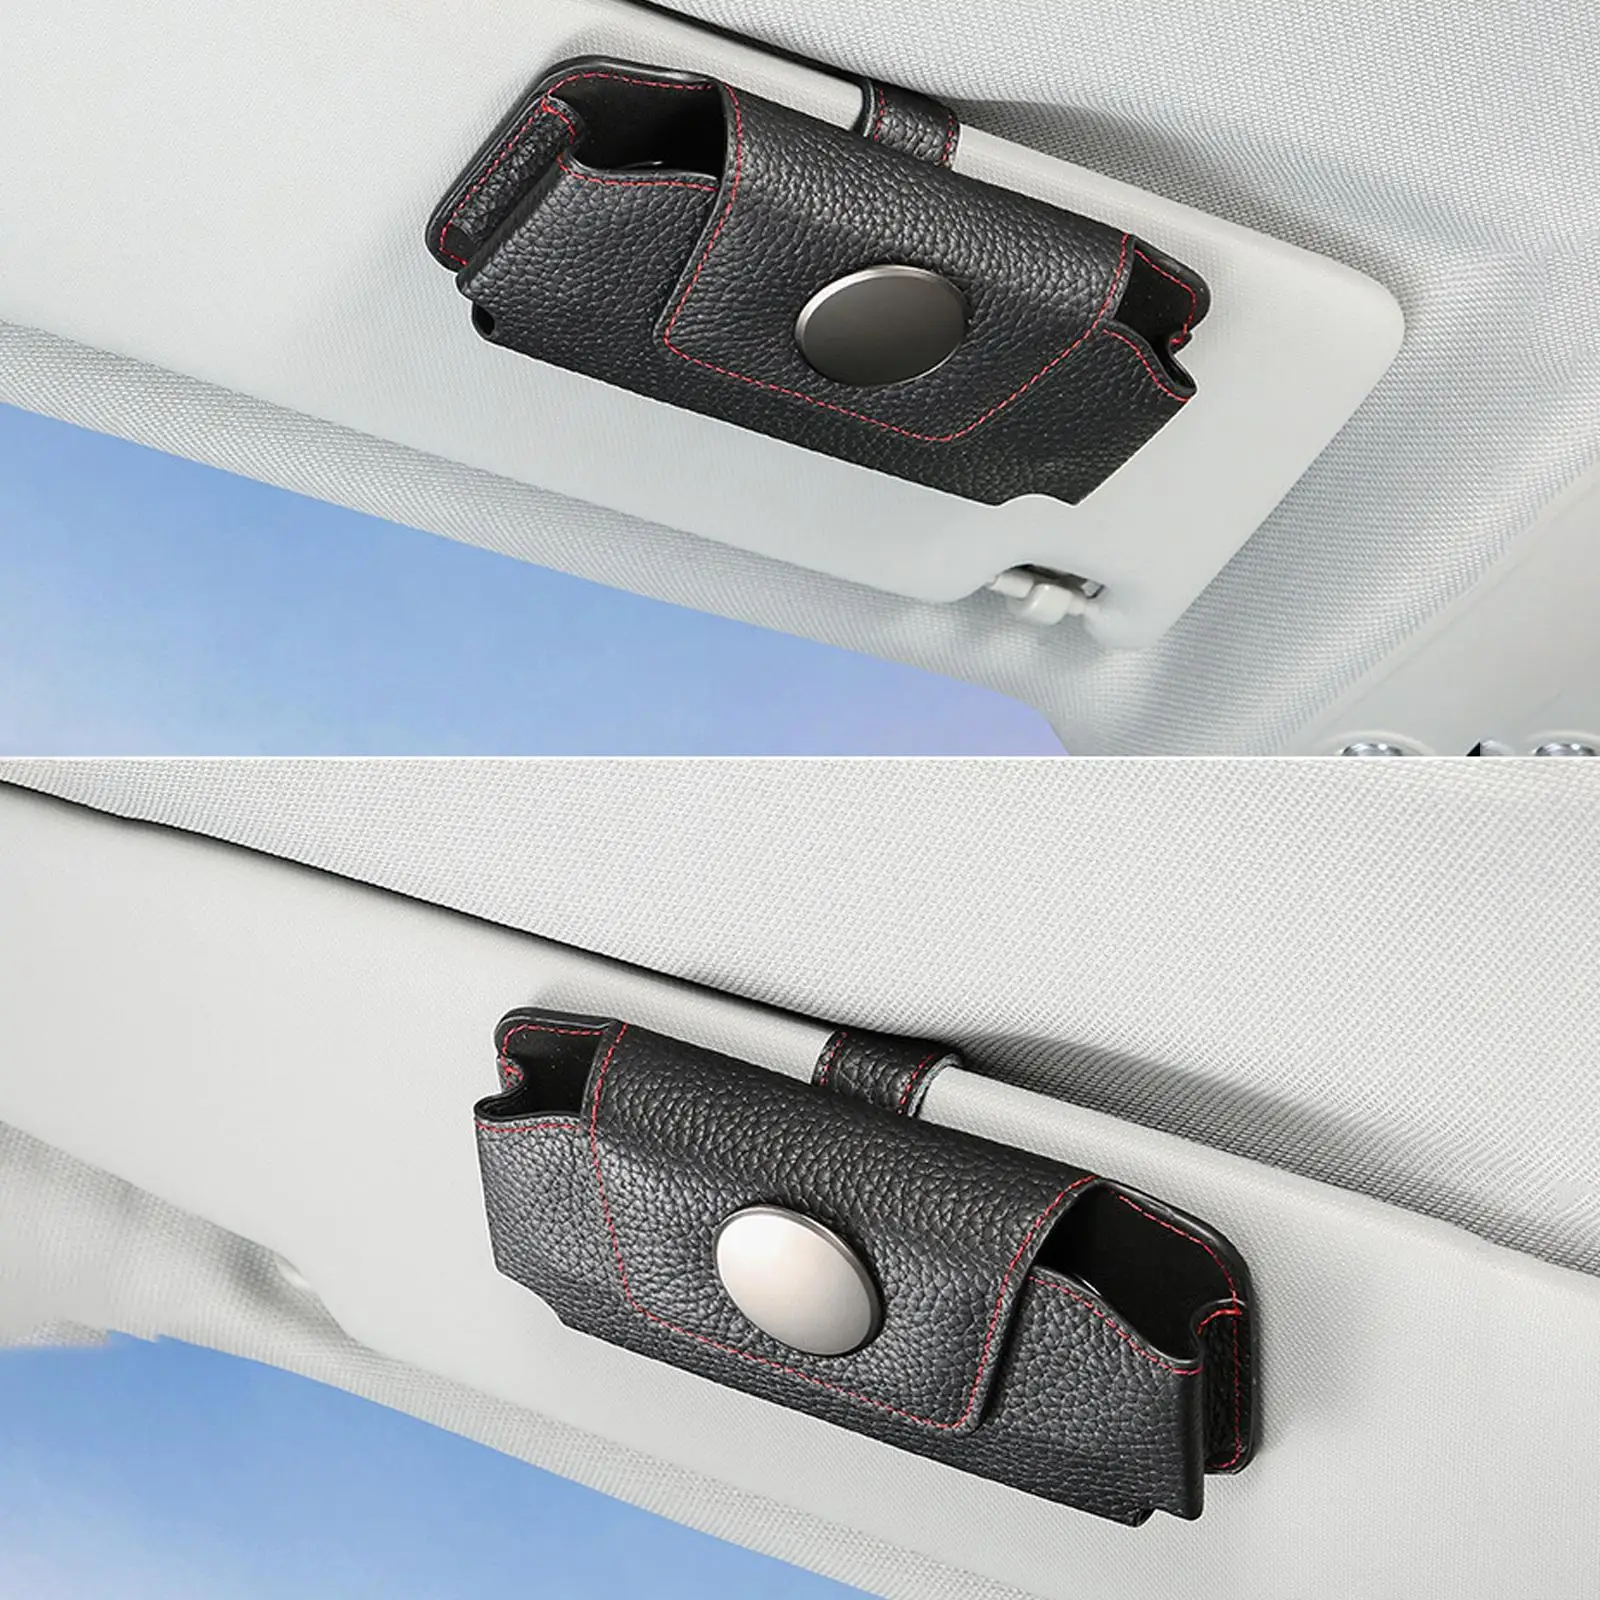 Car Visor  Case Hidden Magnetic Closure with Clip Fit for SUV RV